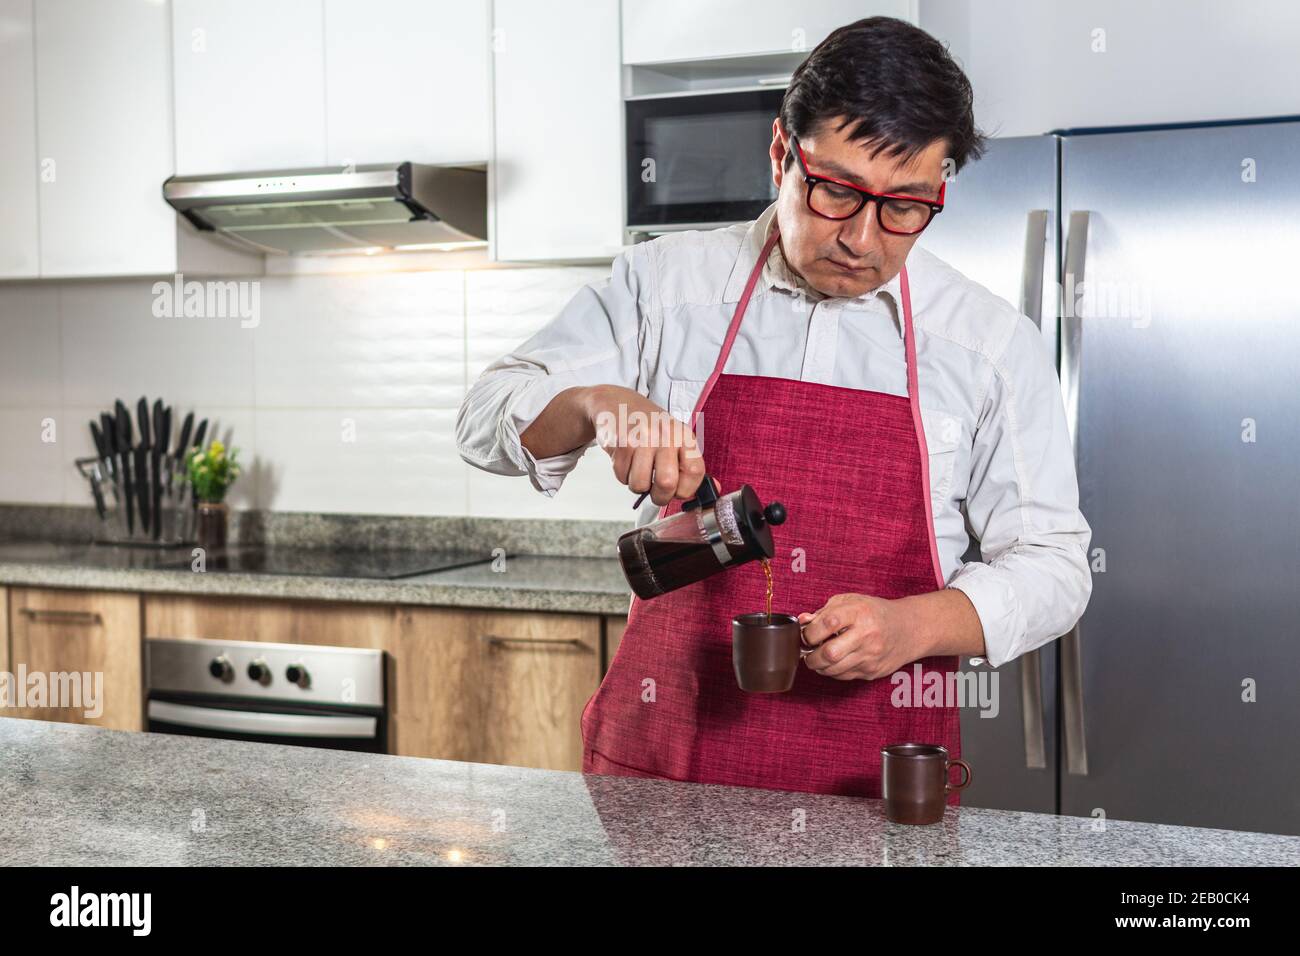 https://c8.alamy.com/comp/2EB0CK4/latin-man-serving-coffee-from-a-french-press-to-a-cup-in-the-kitchen-of-his-home-or-in-a-restaurant-2EB0CK4.jpg